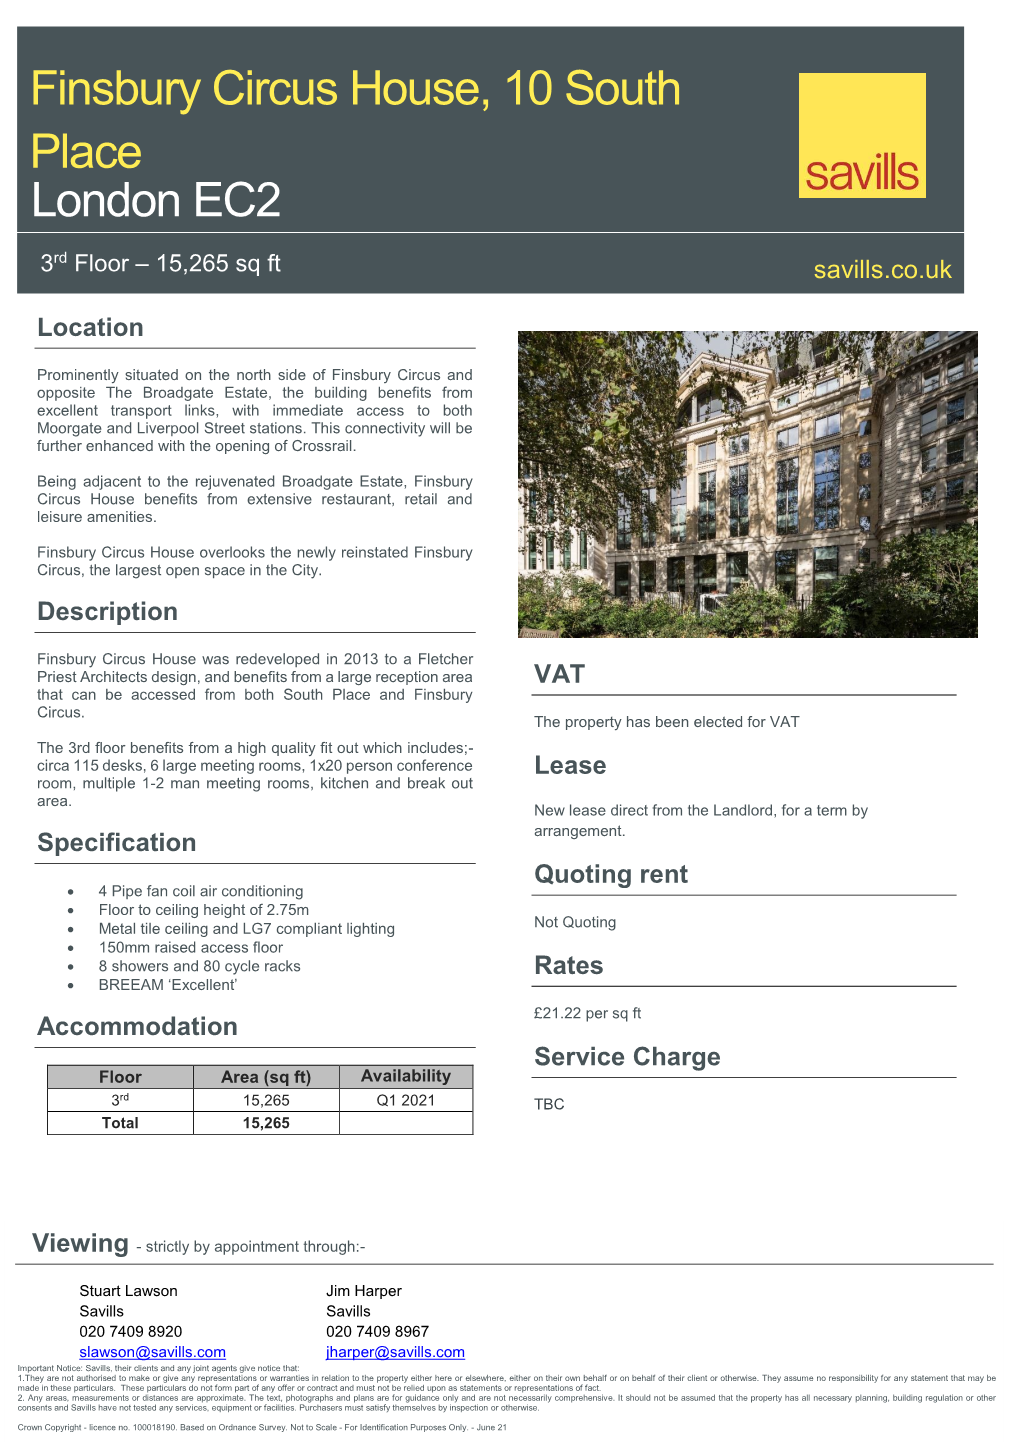 Finsbury Circus House, 10 South Place London EC2